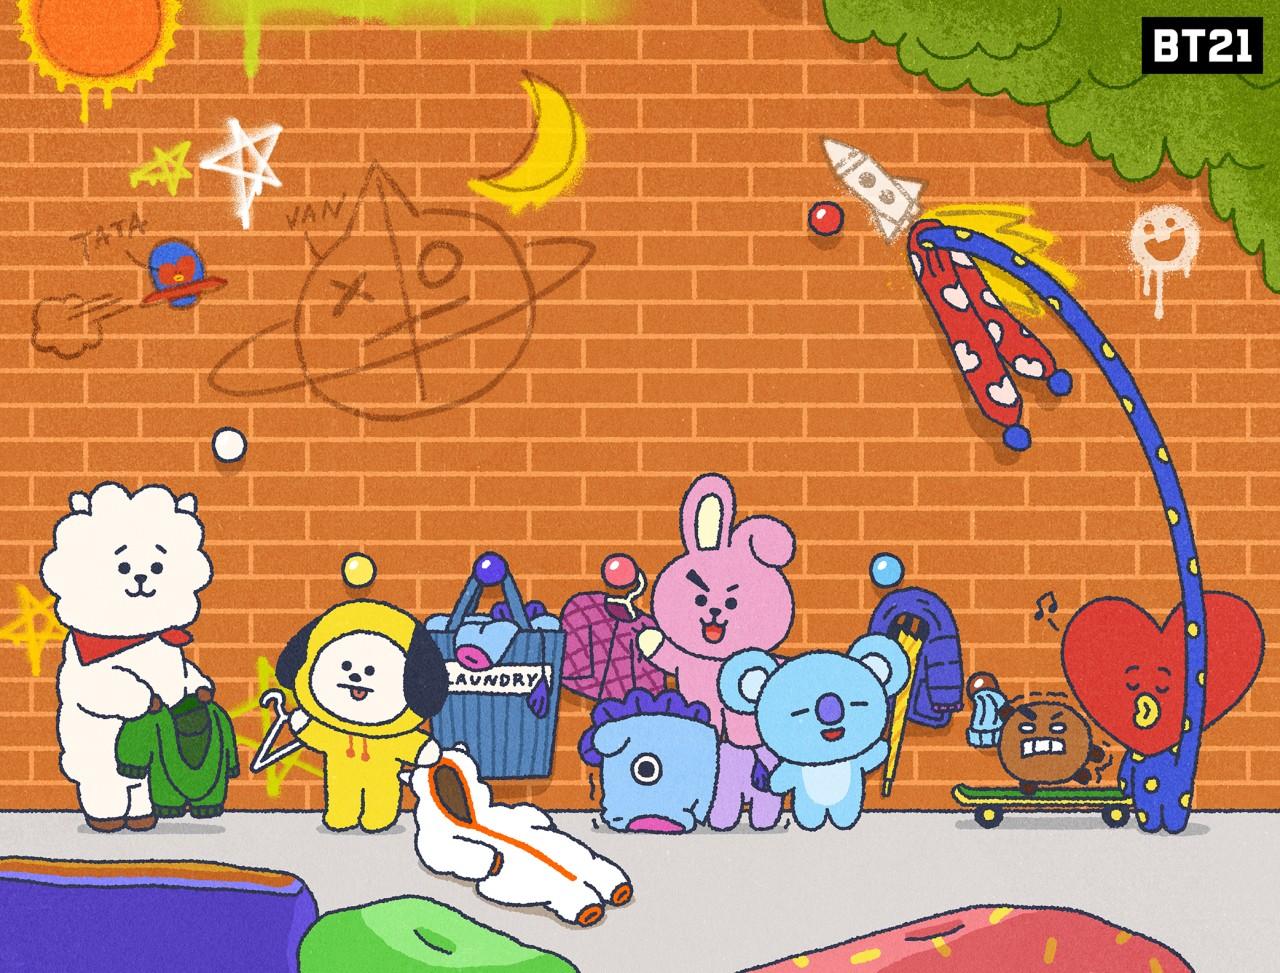 LINEFRIENDS PIC. GIFs, pics and wallpaper